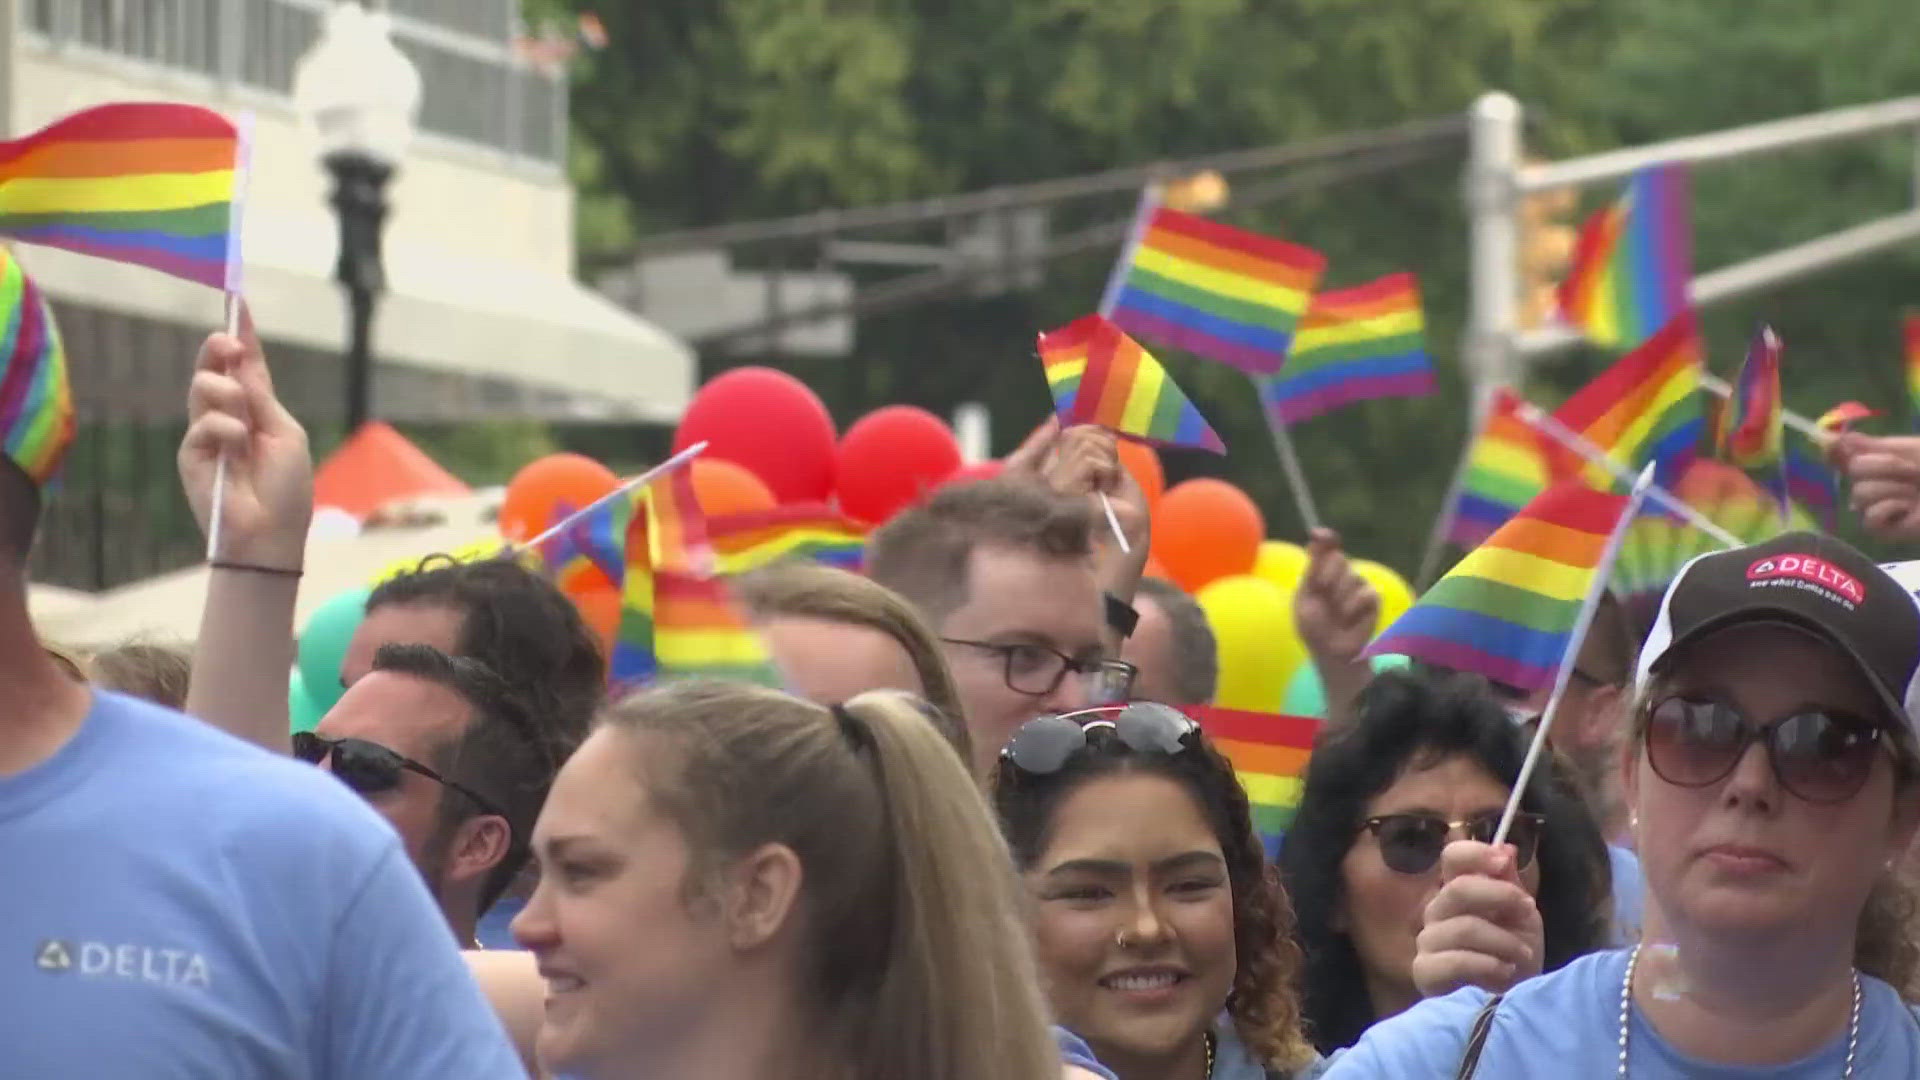 13News reporter Logan Gay breaks down what event organizers and police are doing to help keep the public safe during the Indy Pride festival and parade.